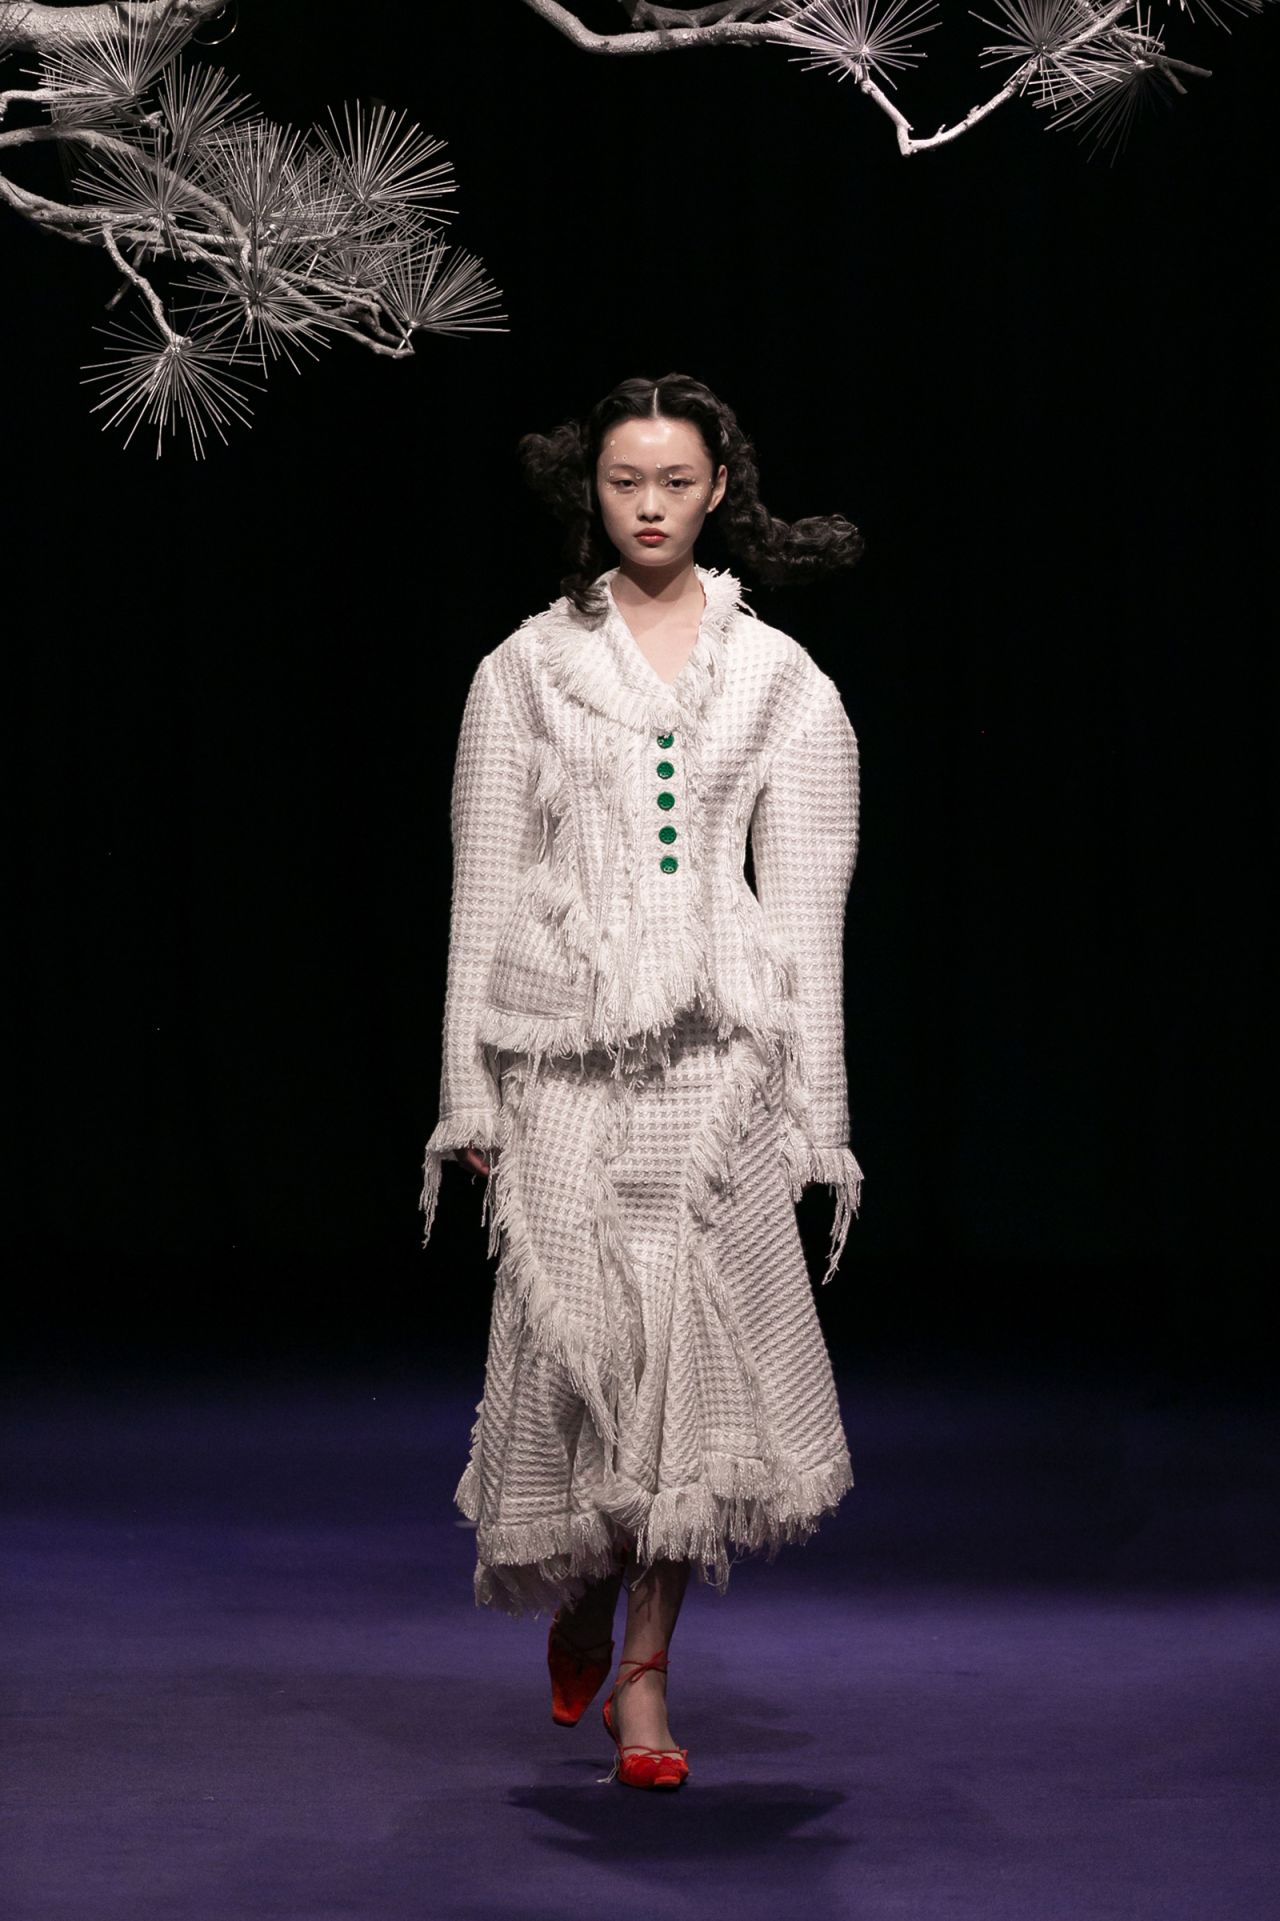 A look from Yuhan Wang, one of a number of up-and-coming designers on show at Shanghai Fashion Week.